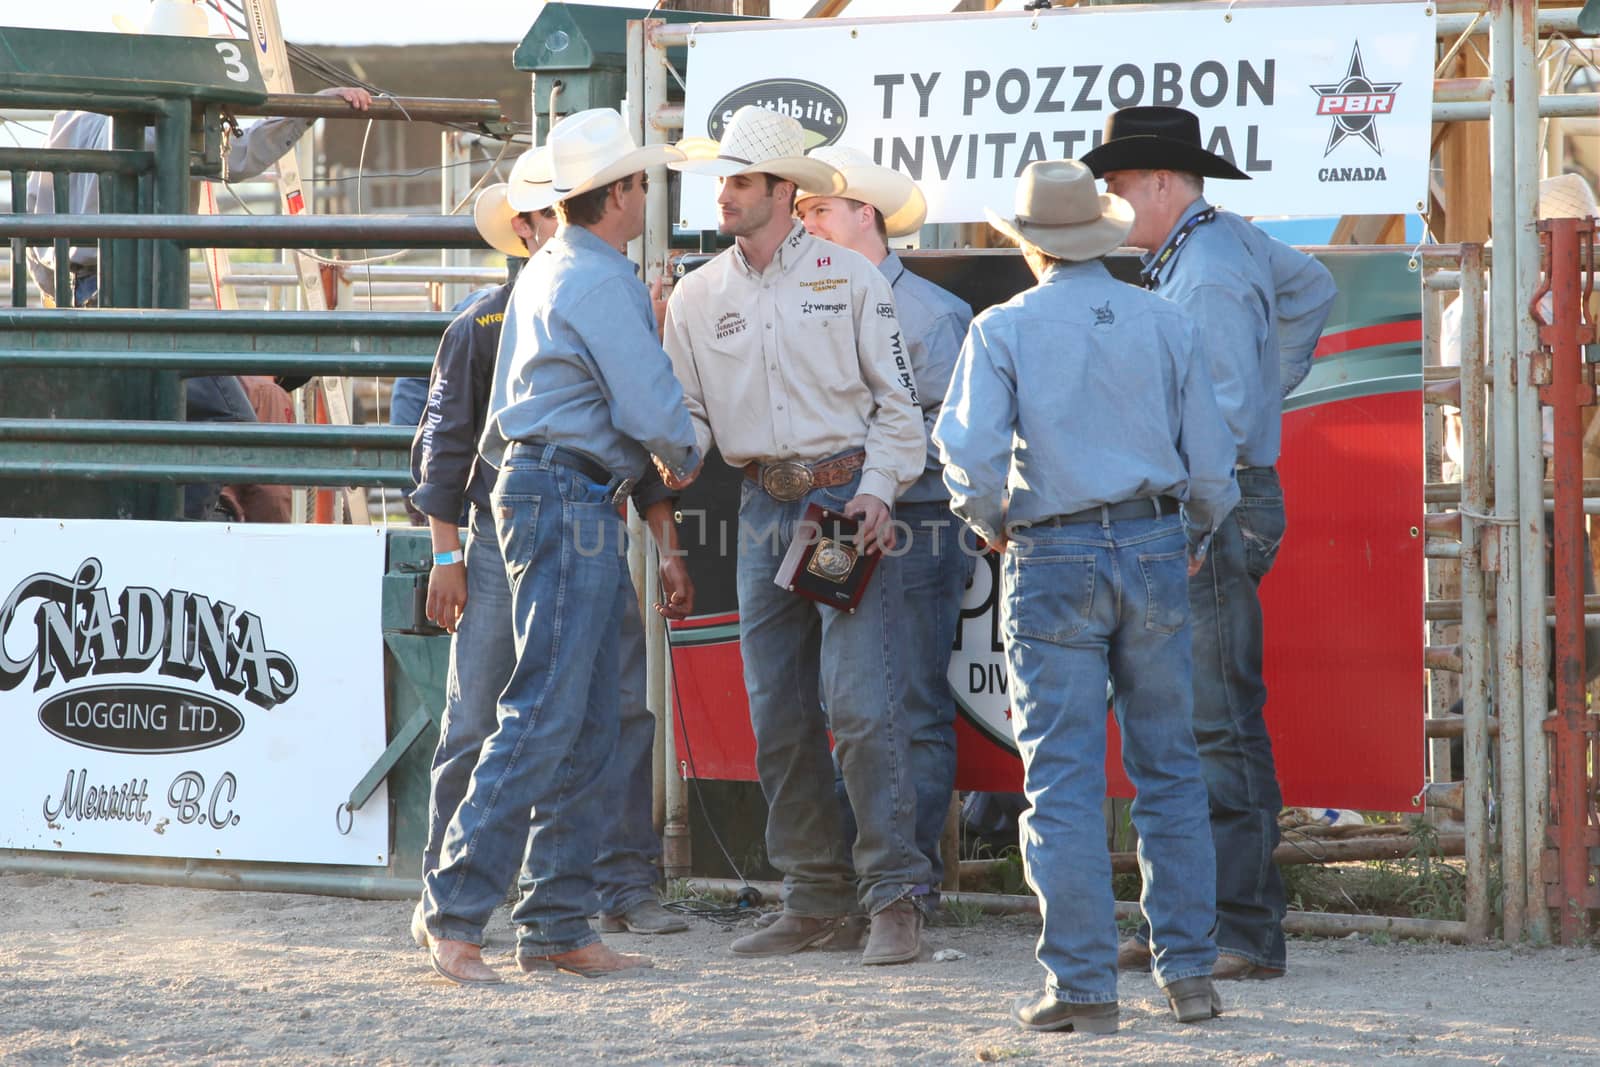 MERRITT, B.C. CANADA - May 30, 2015: Winner of The 3rd Annual Ty Pozzobon Invitational PBR Event.